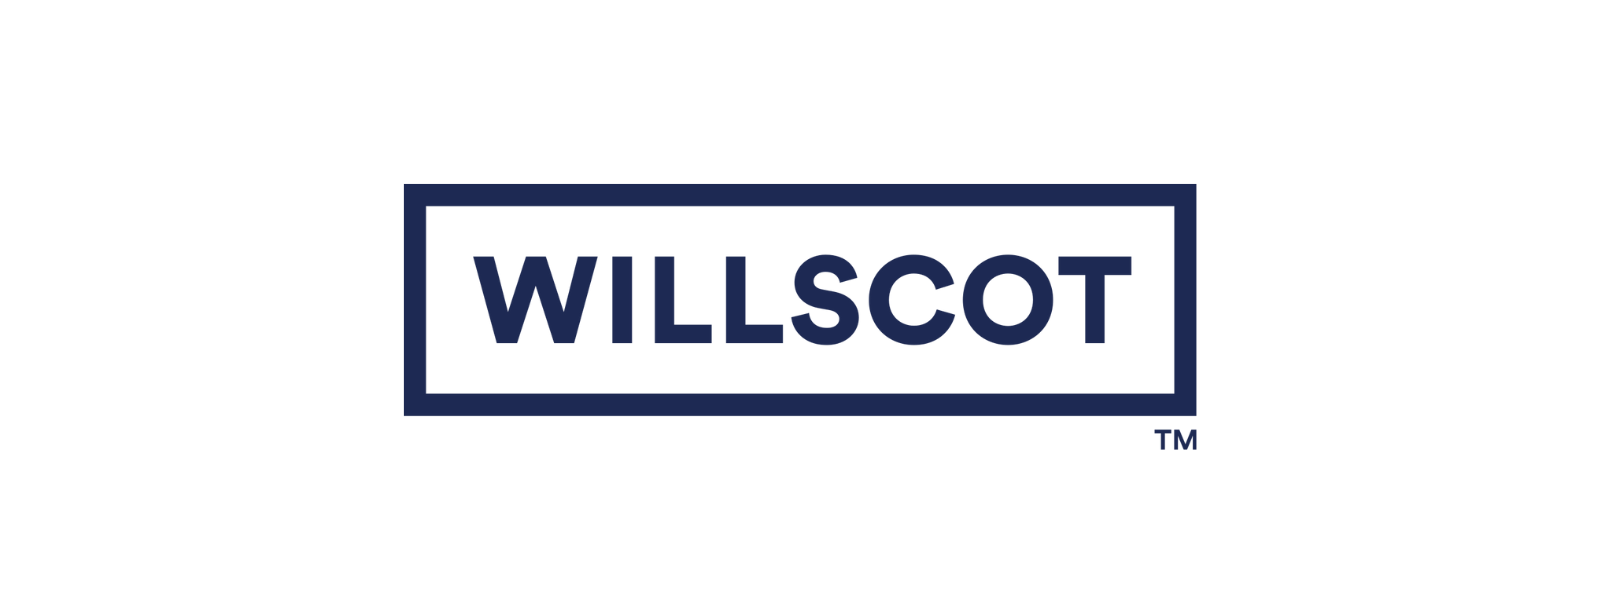 WillScot is one of the few nationwide suppliers of modular buildings, office trailers and portable classrooms in the USA